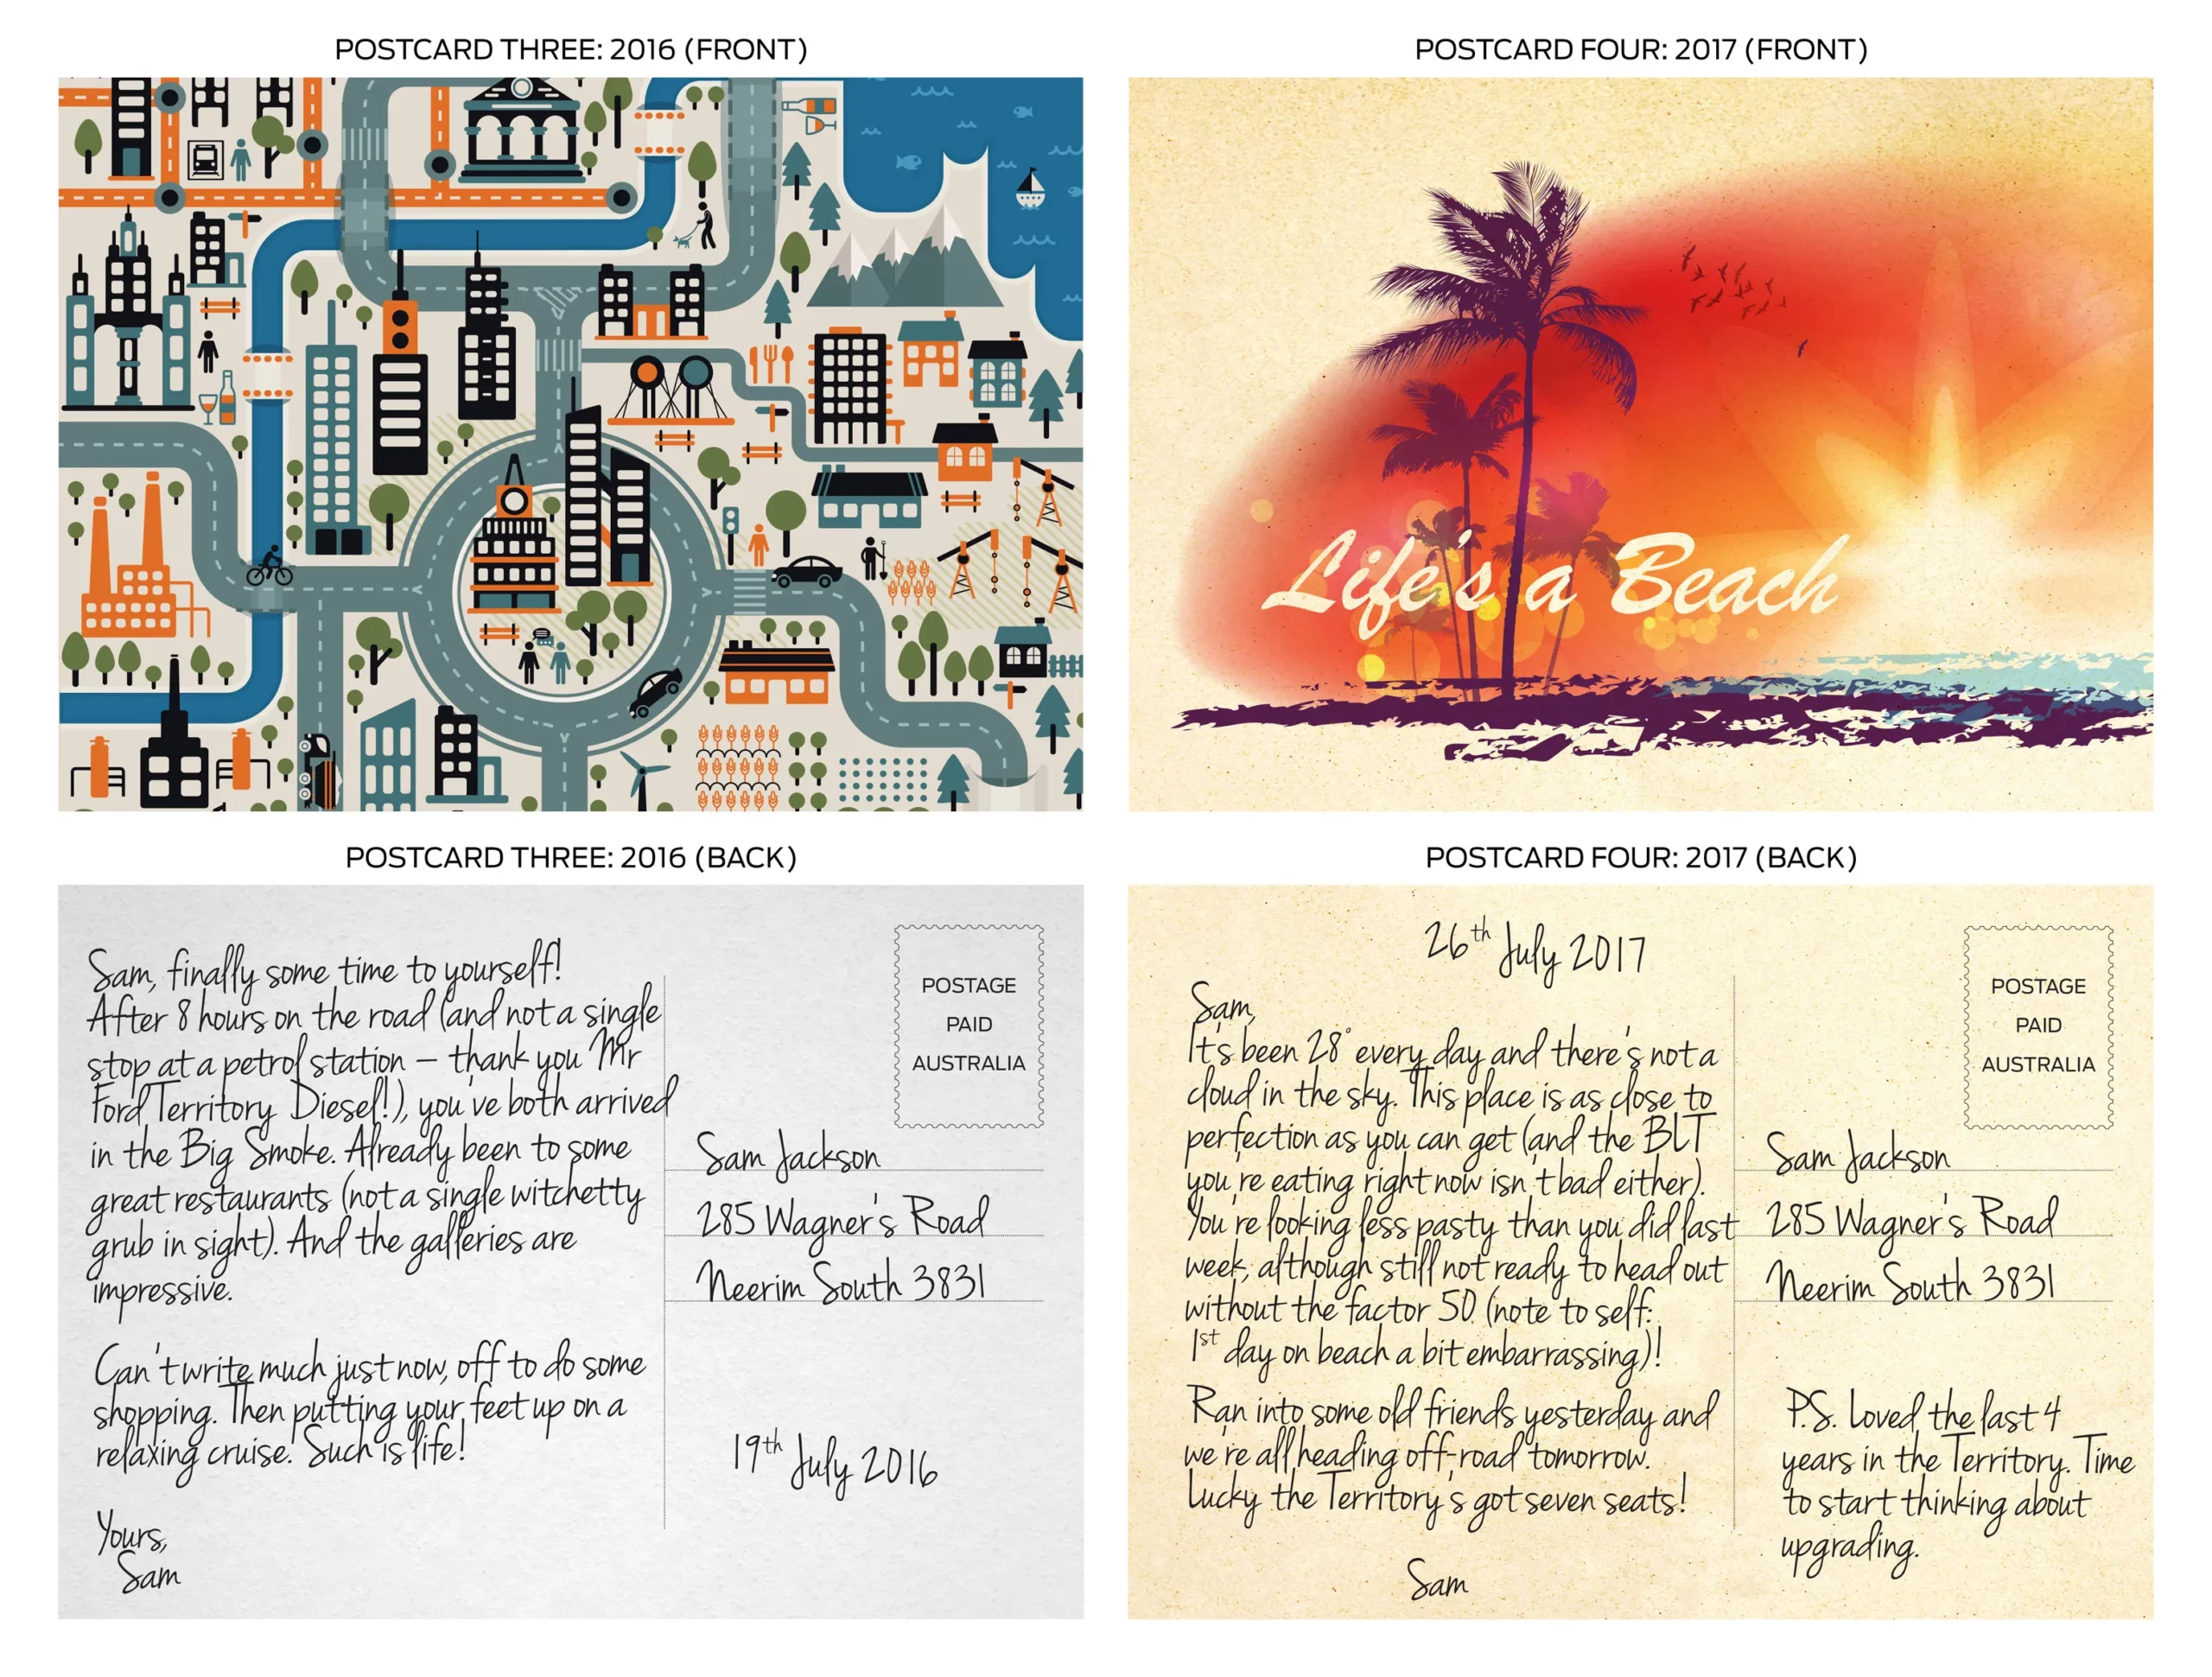 Creative CRM postcards send to Ford customers about the adventures they are missing out of